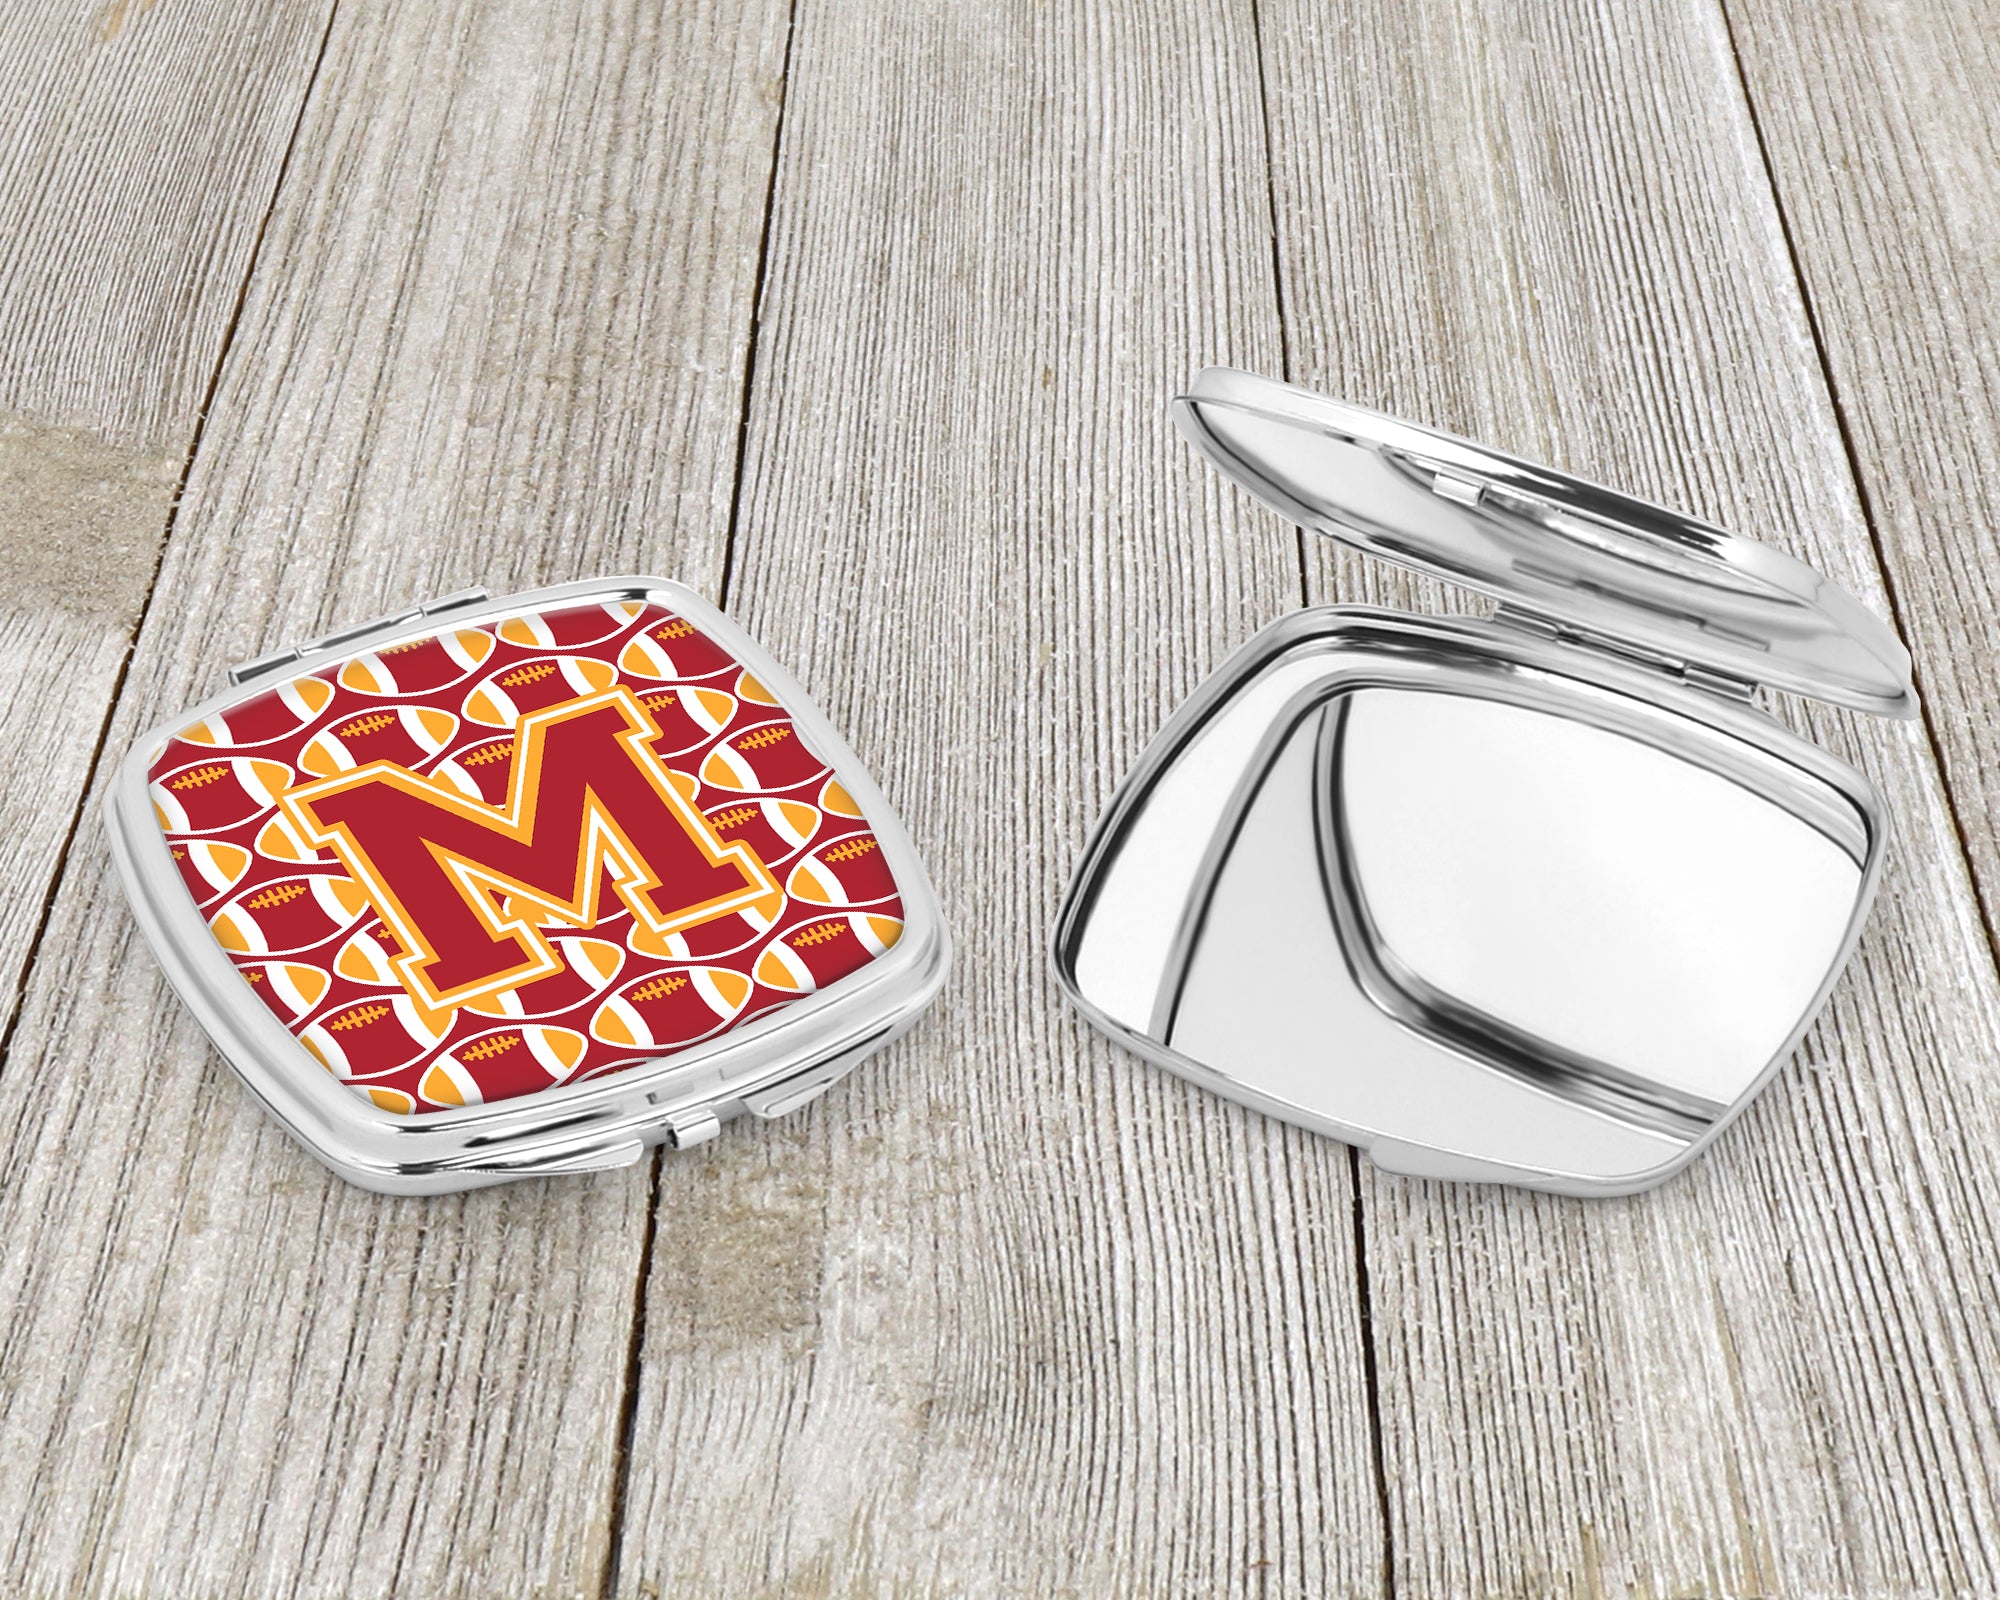 Letter M Football Cardinal and Gold Compact Mirror CJ1070-MSCM  the-store.com.